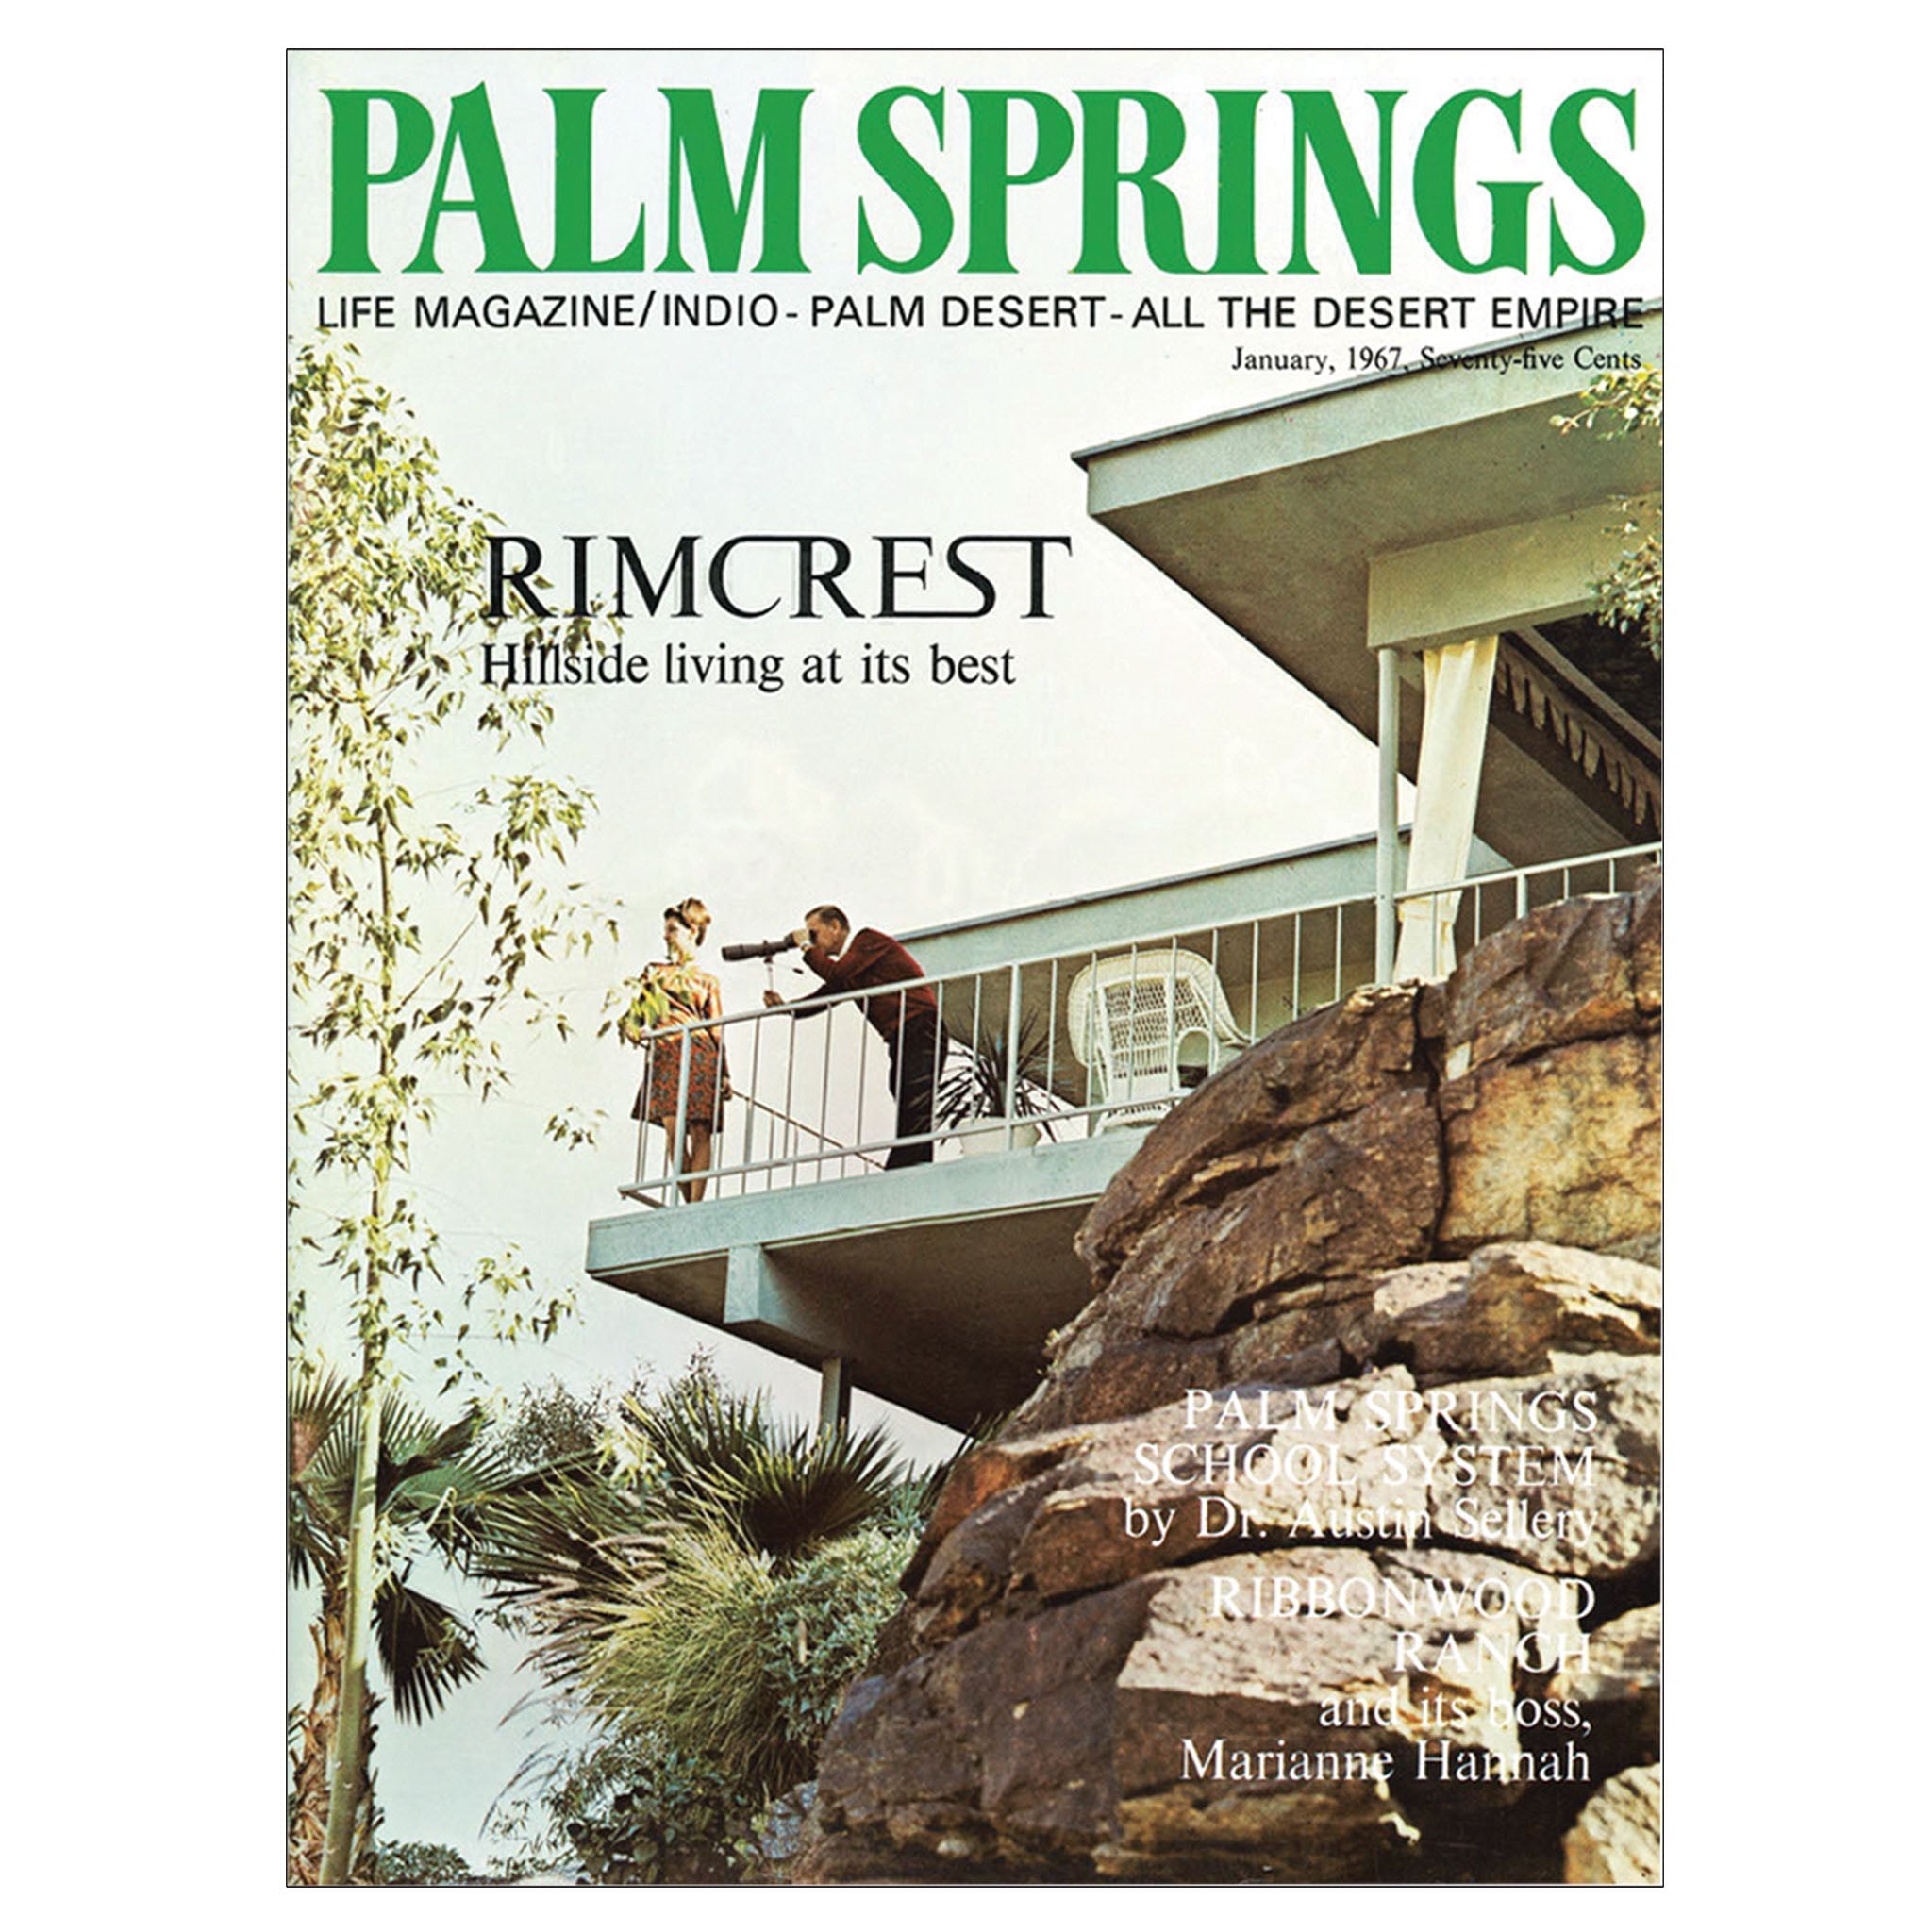 Palm Springs Life - January 1967  - Cover Poster